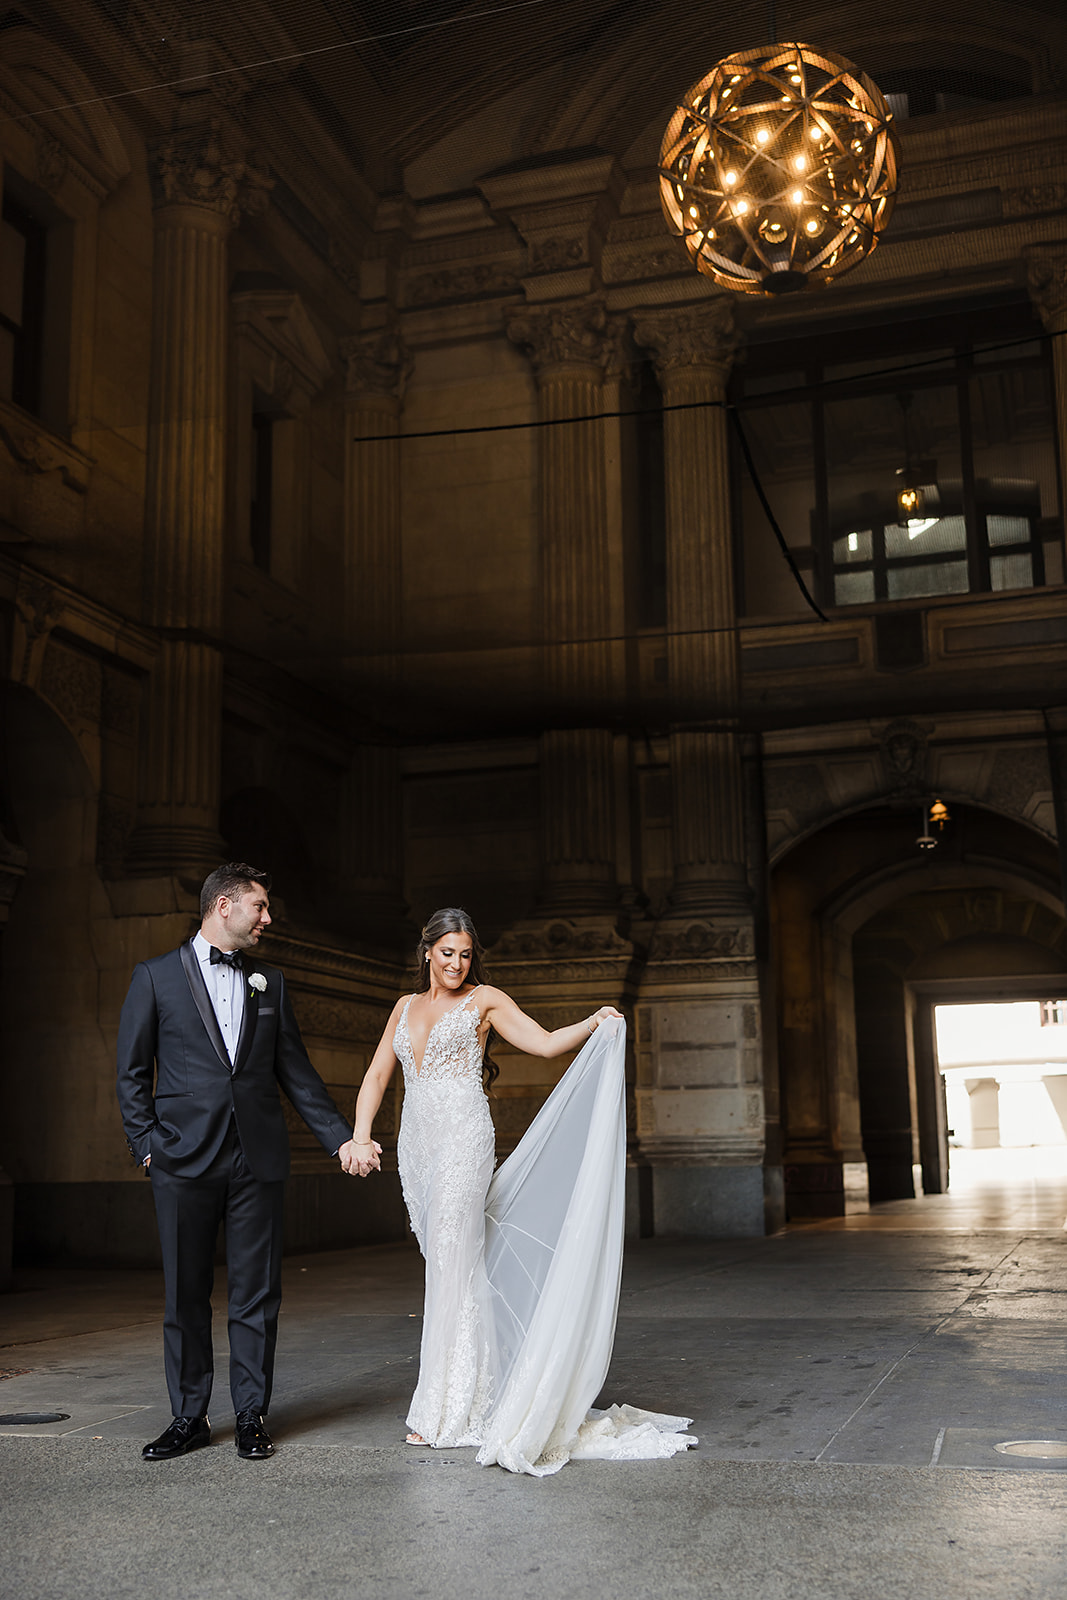 Stunning effortless and timeless portrait of the bride and groom at Philadelphia City Hall